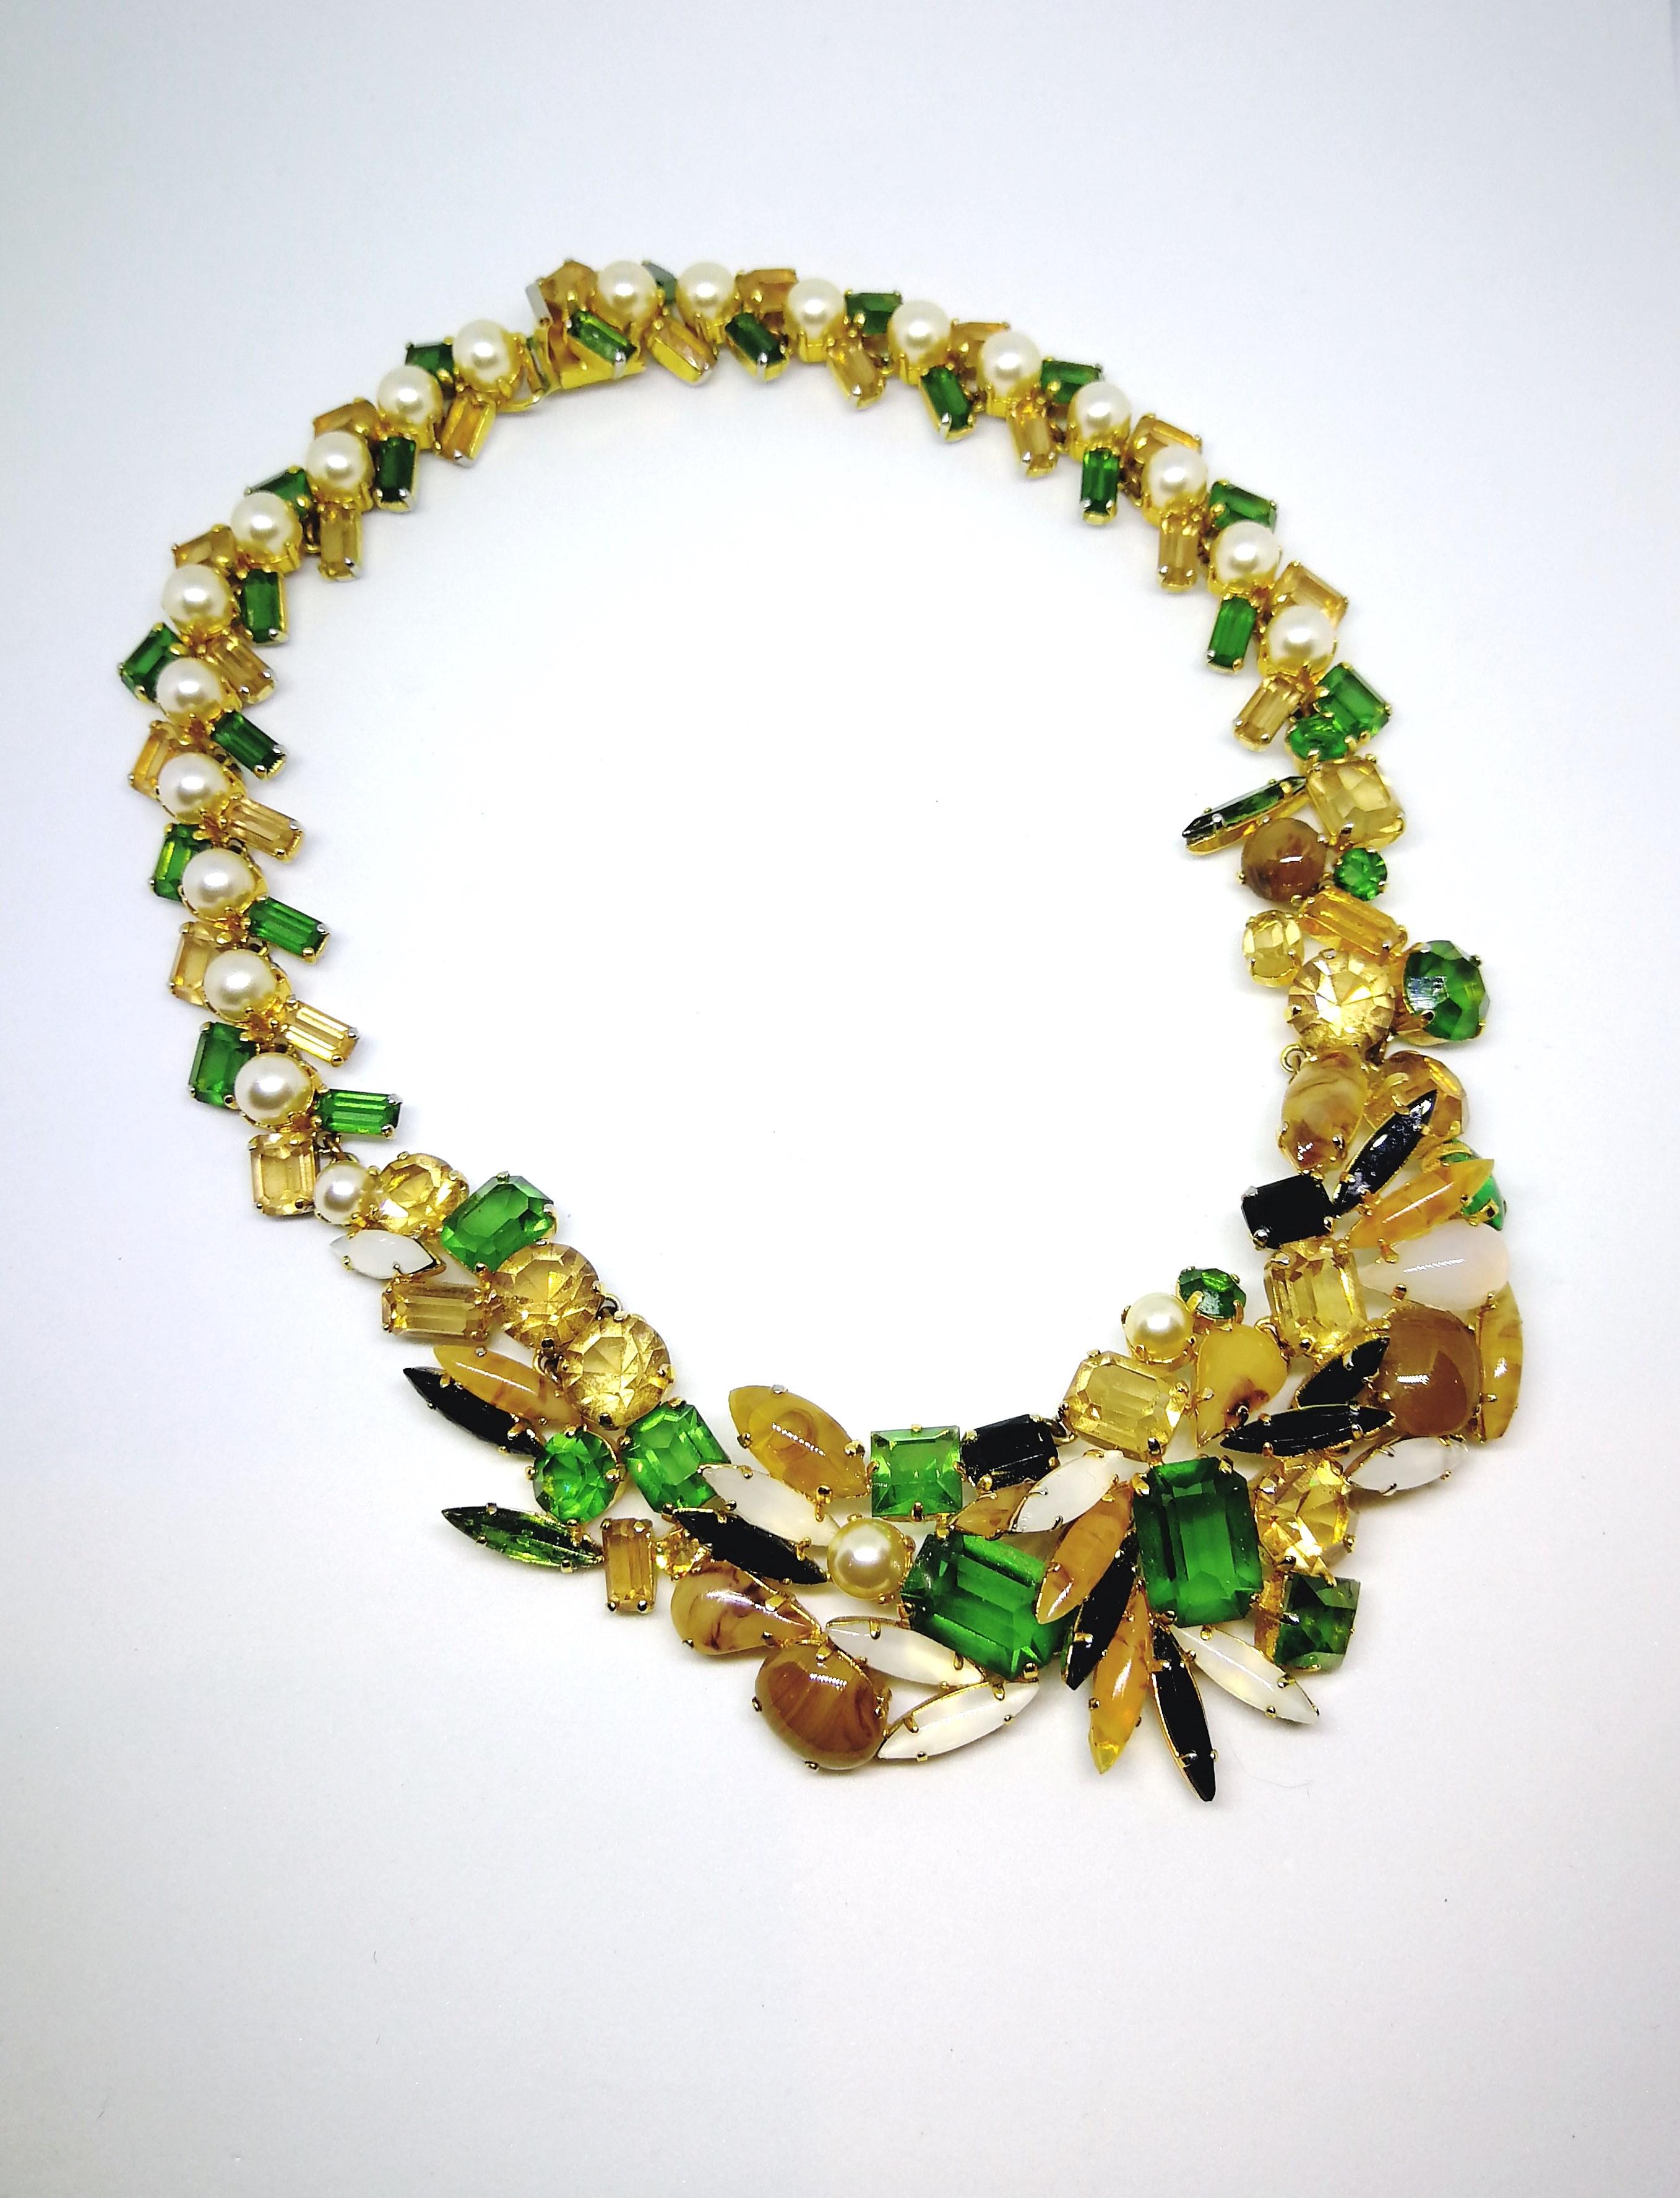 A rare and highly collectable necklace from 1962, made by Henkel and Grosse for Christian Dior. Composed of unique assorted shaped, opaque and clear pastes, set in a haphazard, organic design, interspersed with glass pearls, at the front, it then